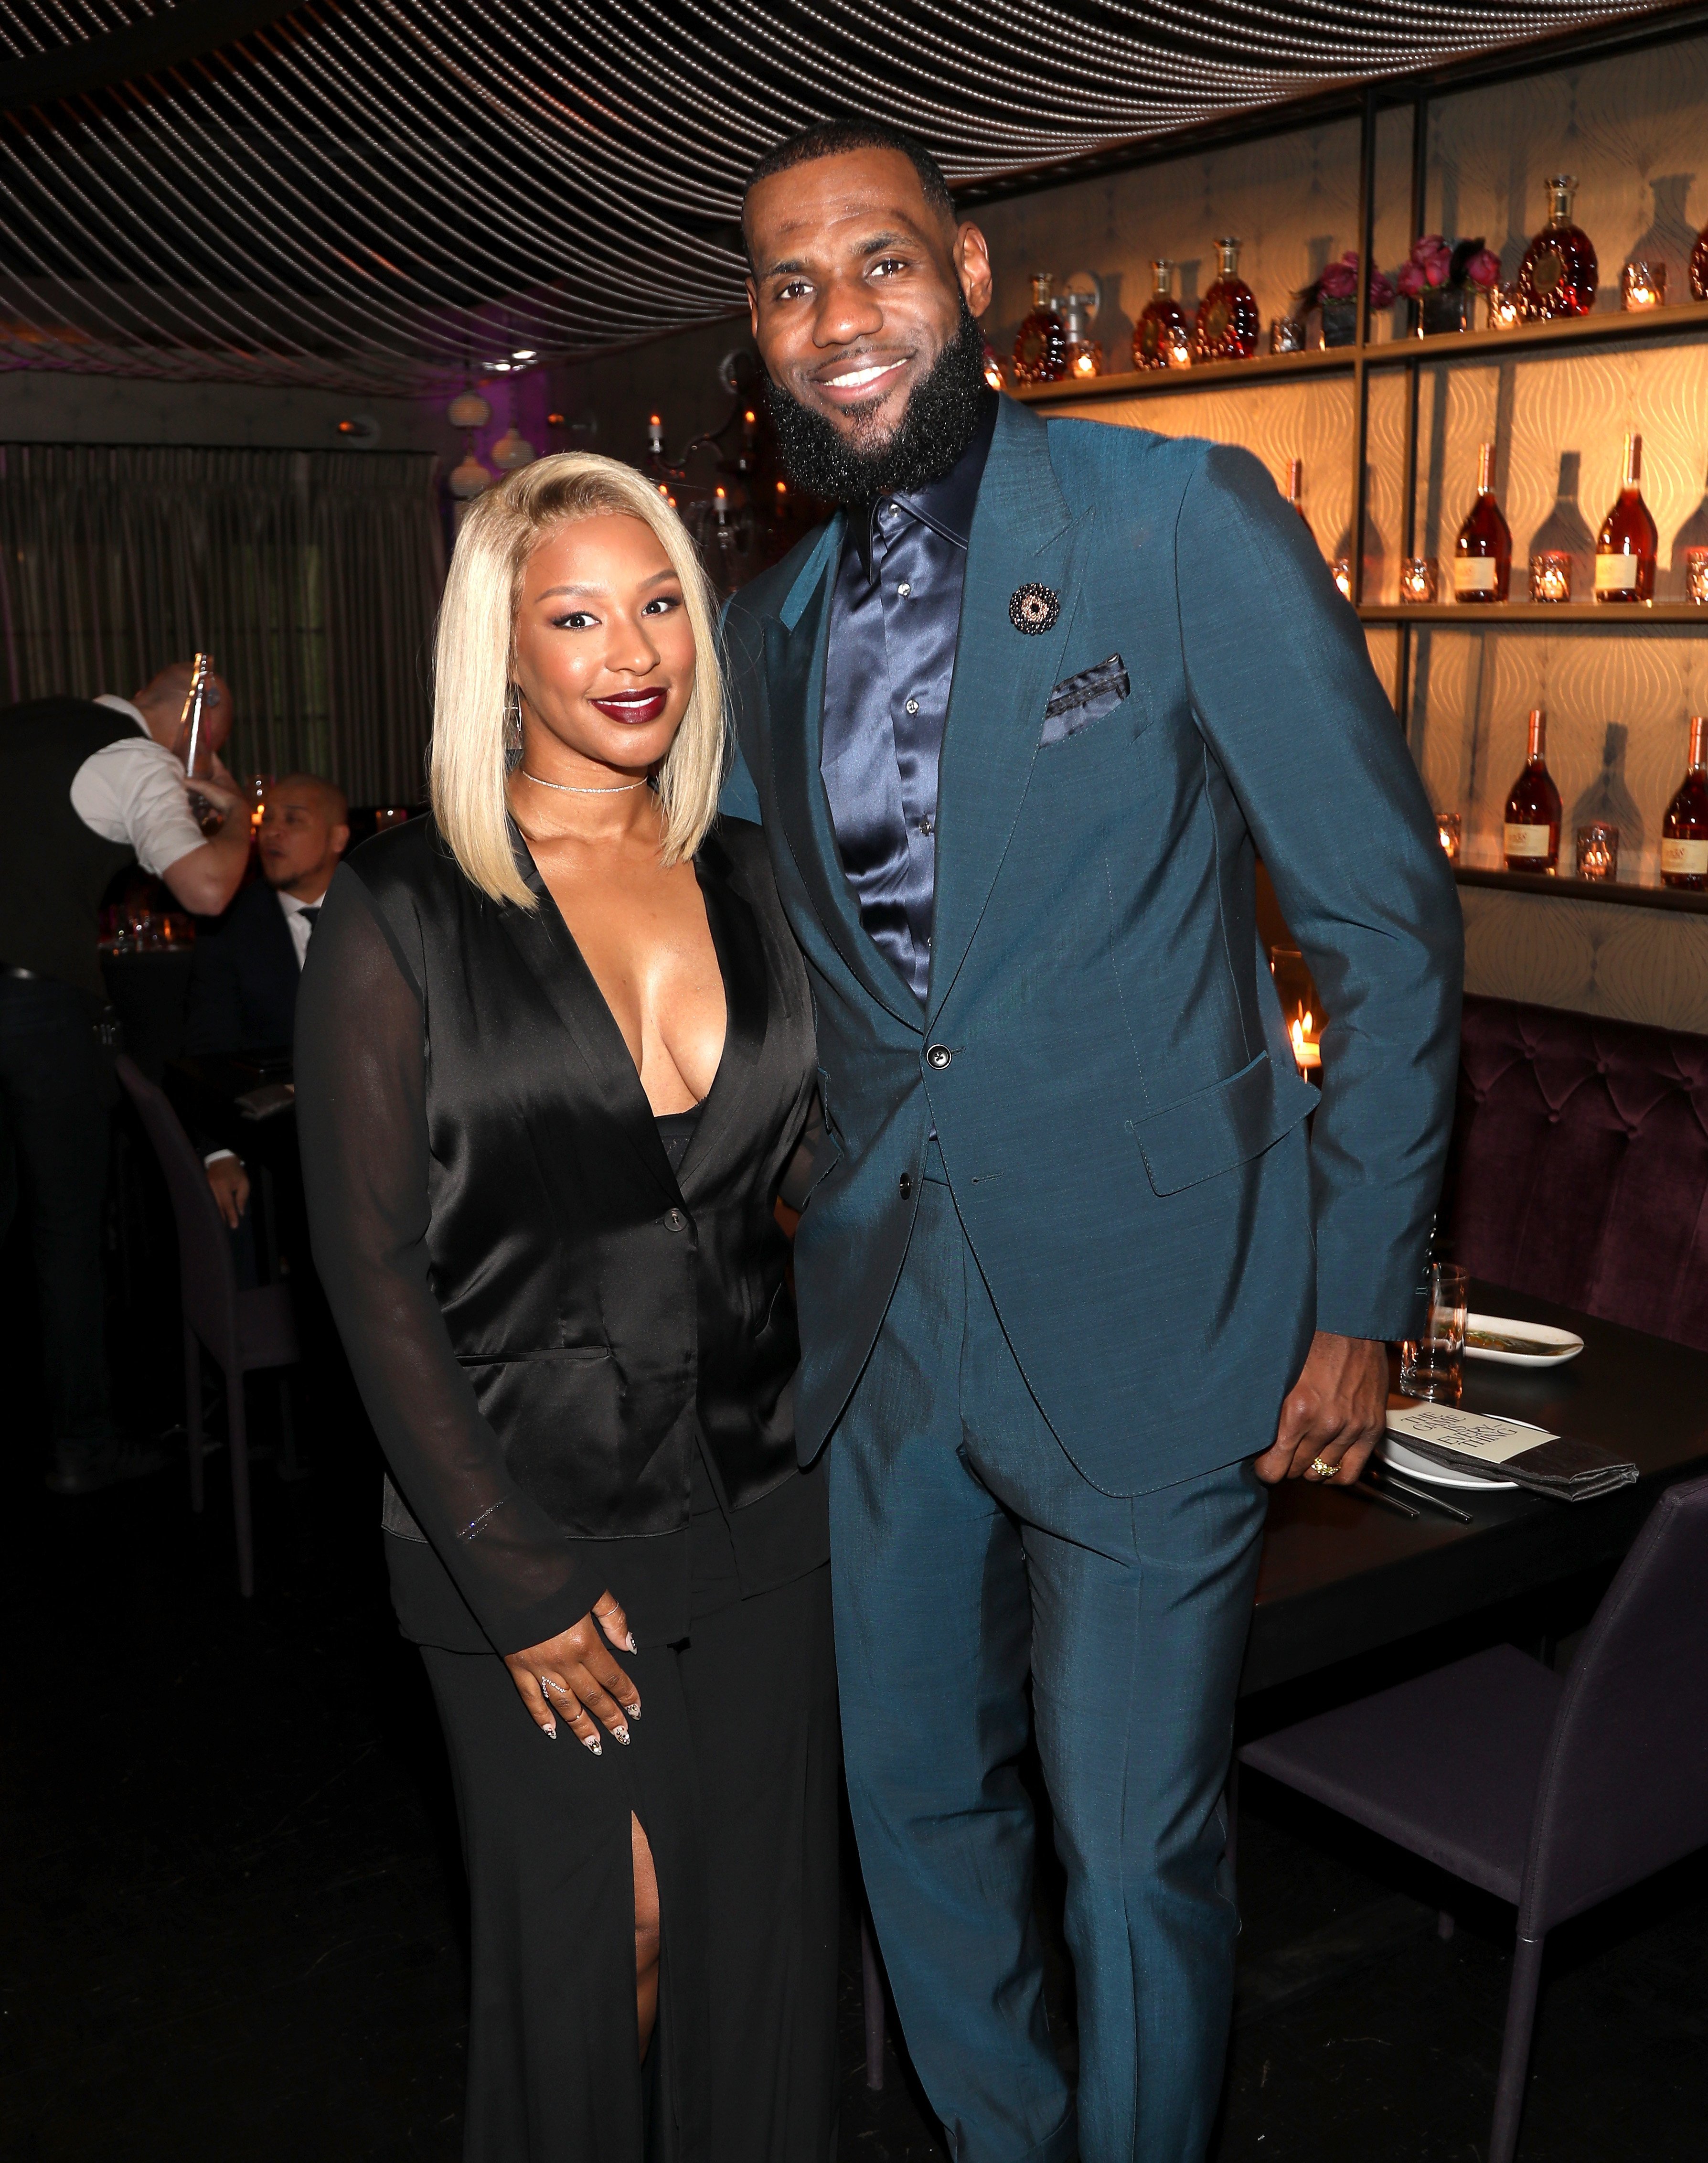 Savannah & LeBron James at the Klutch Sports Group "More Than A Game" Dinner on Feb. 17, 2018 in Los Angeles | Photo: Getty Images